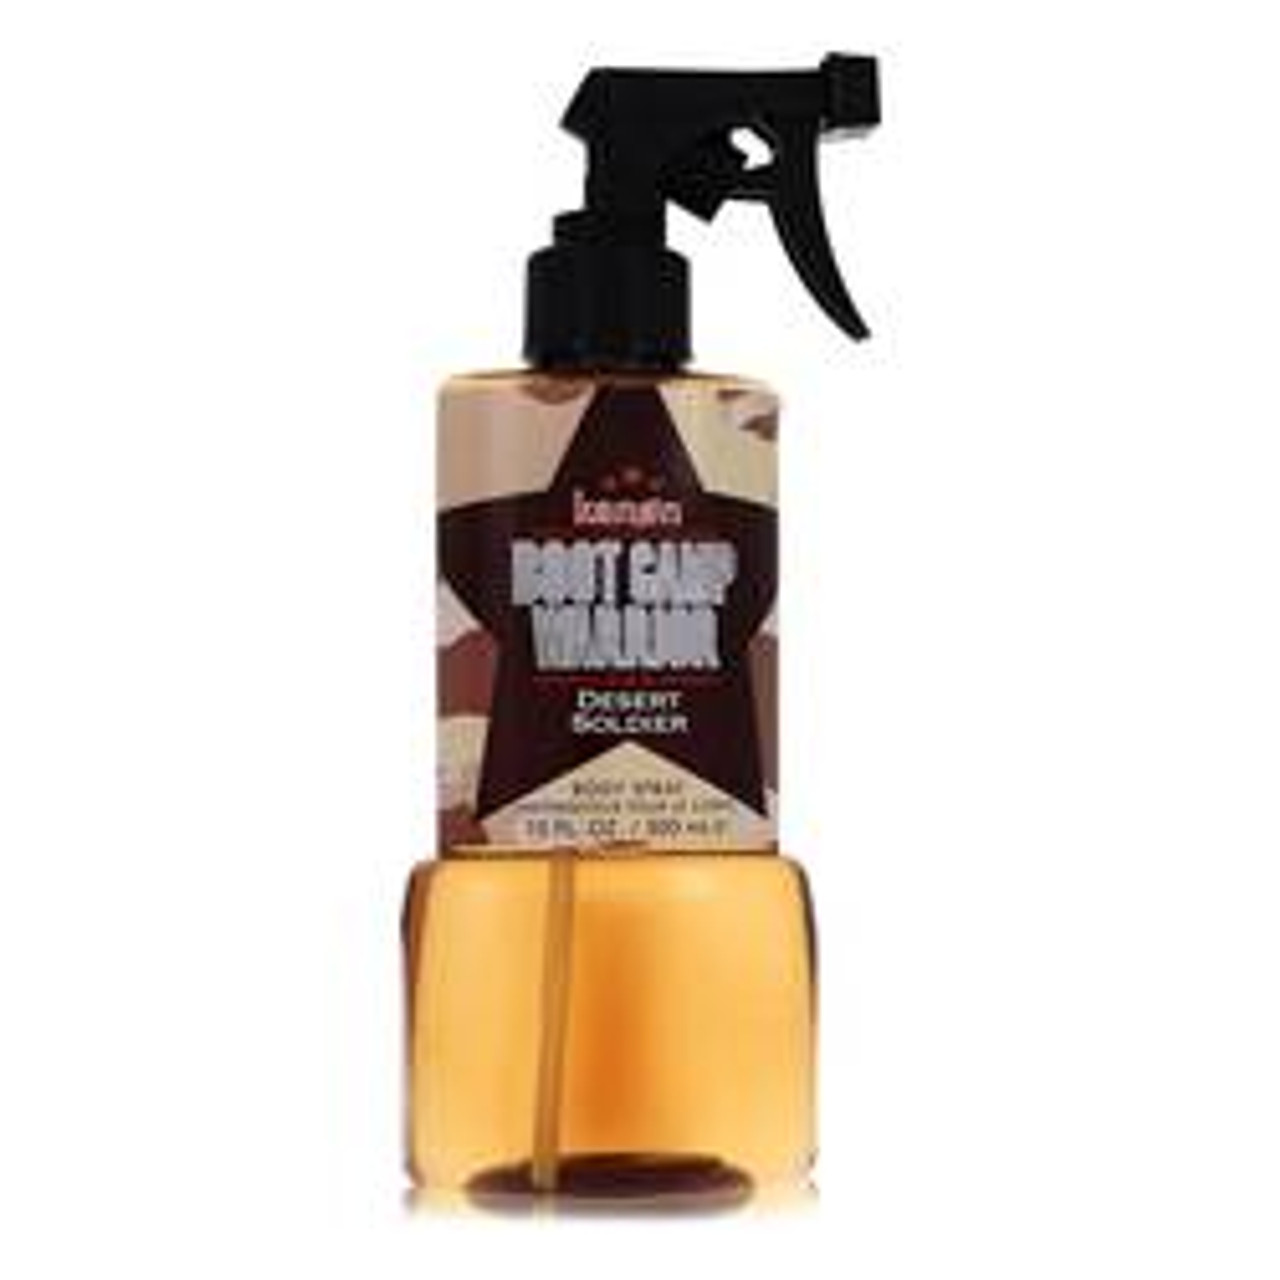 Kanon Boot Camp Warrior Desert Soldier Cologne By Kanon Body Spray 10 oz for Men - [From 27.00 - Choose pk Qty ] - *Ships from Miami